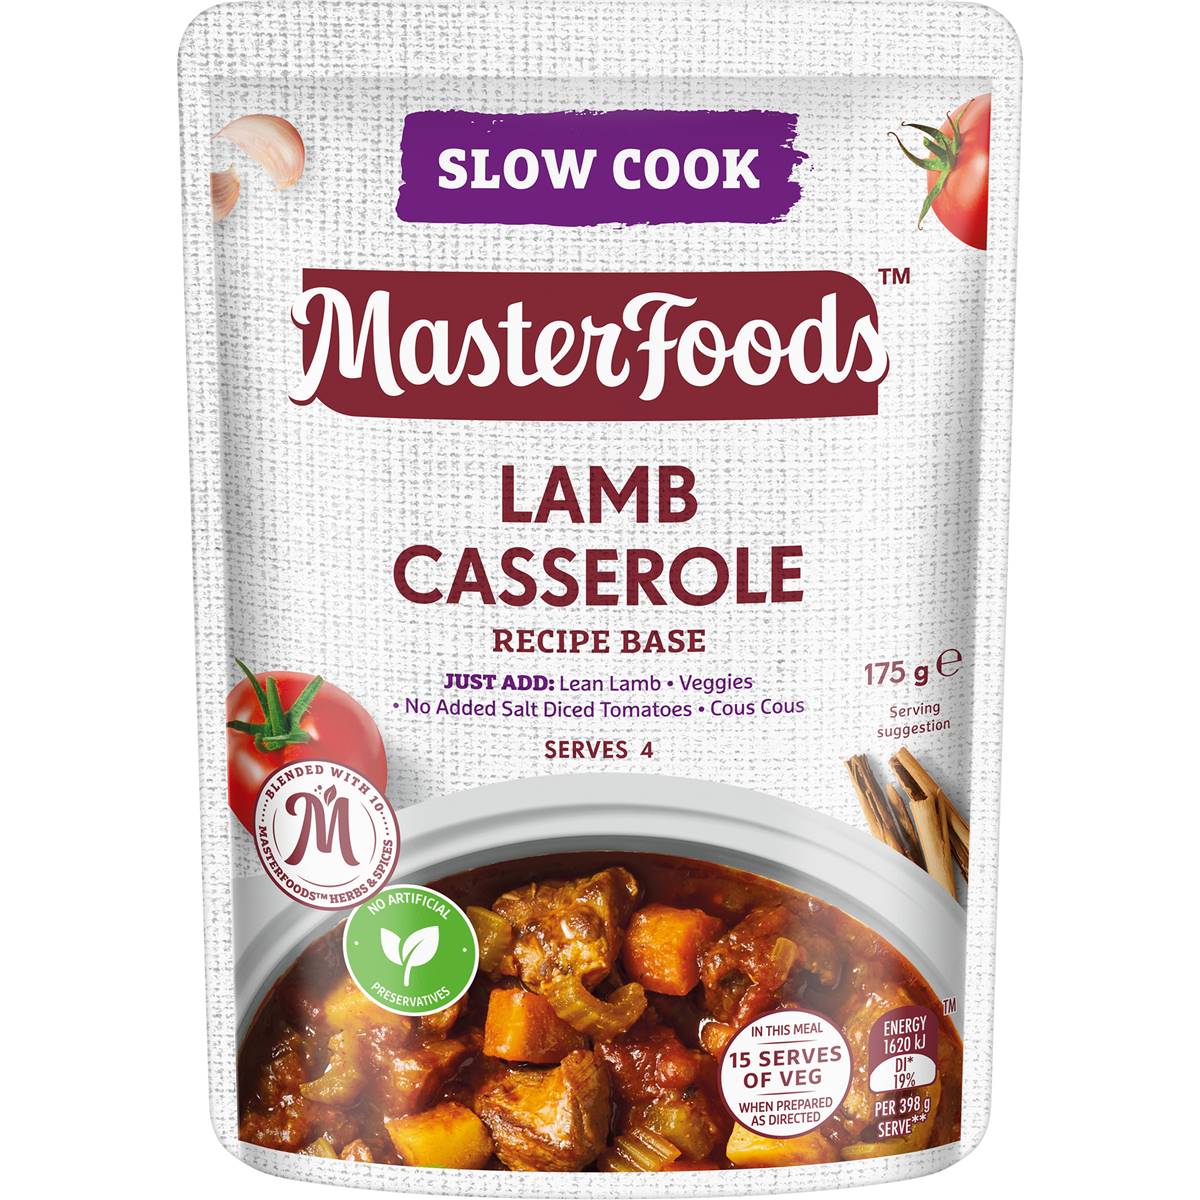 Masterfoods Slow Cooker Lamb Casserole